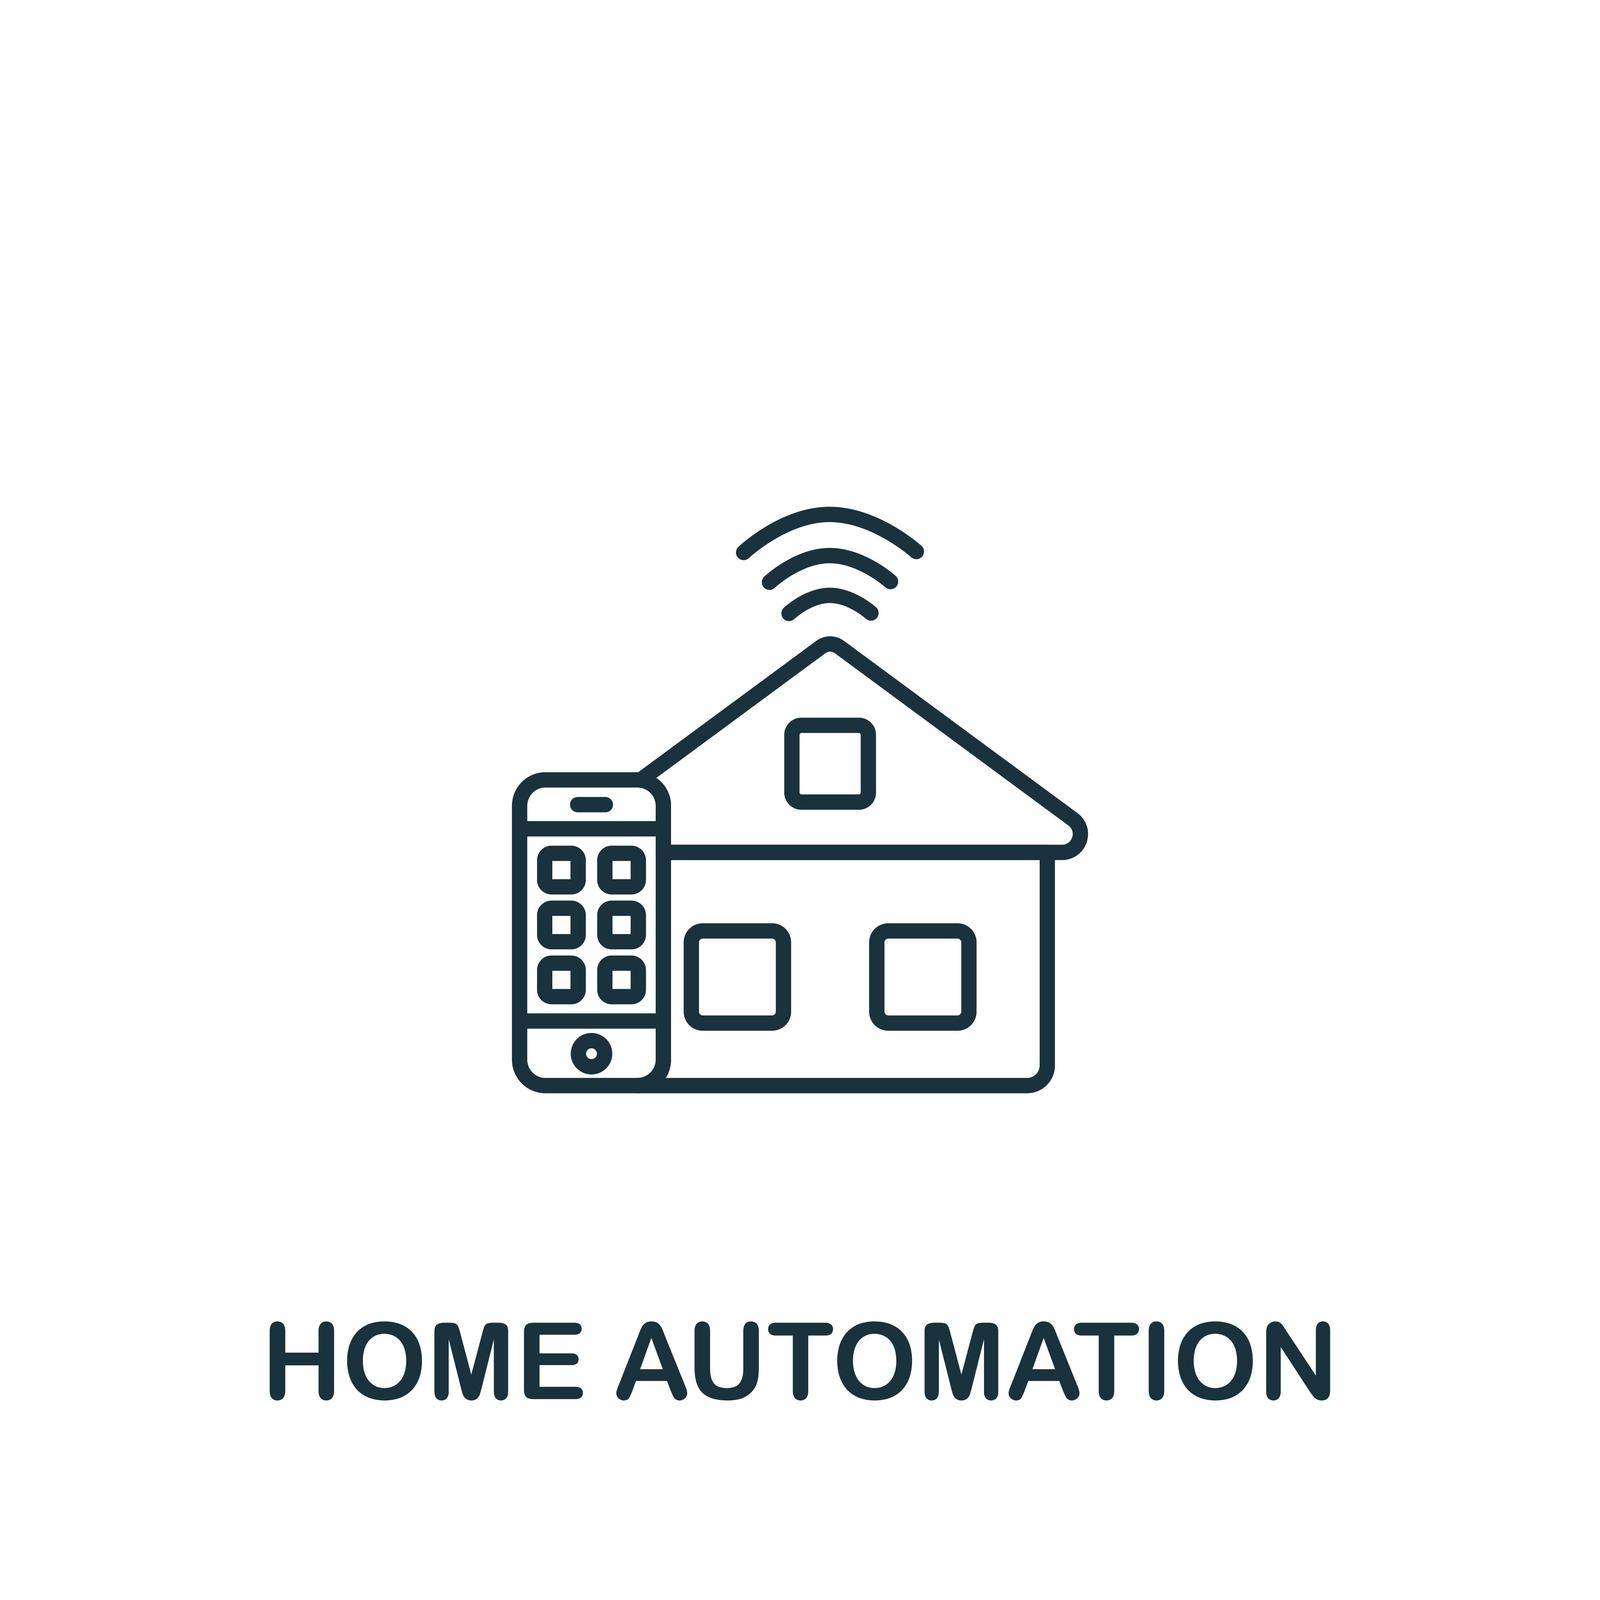 Home Automation icon. Simple line element symbol for templates, web design and infographics.